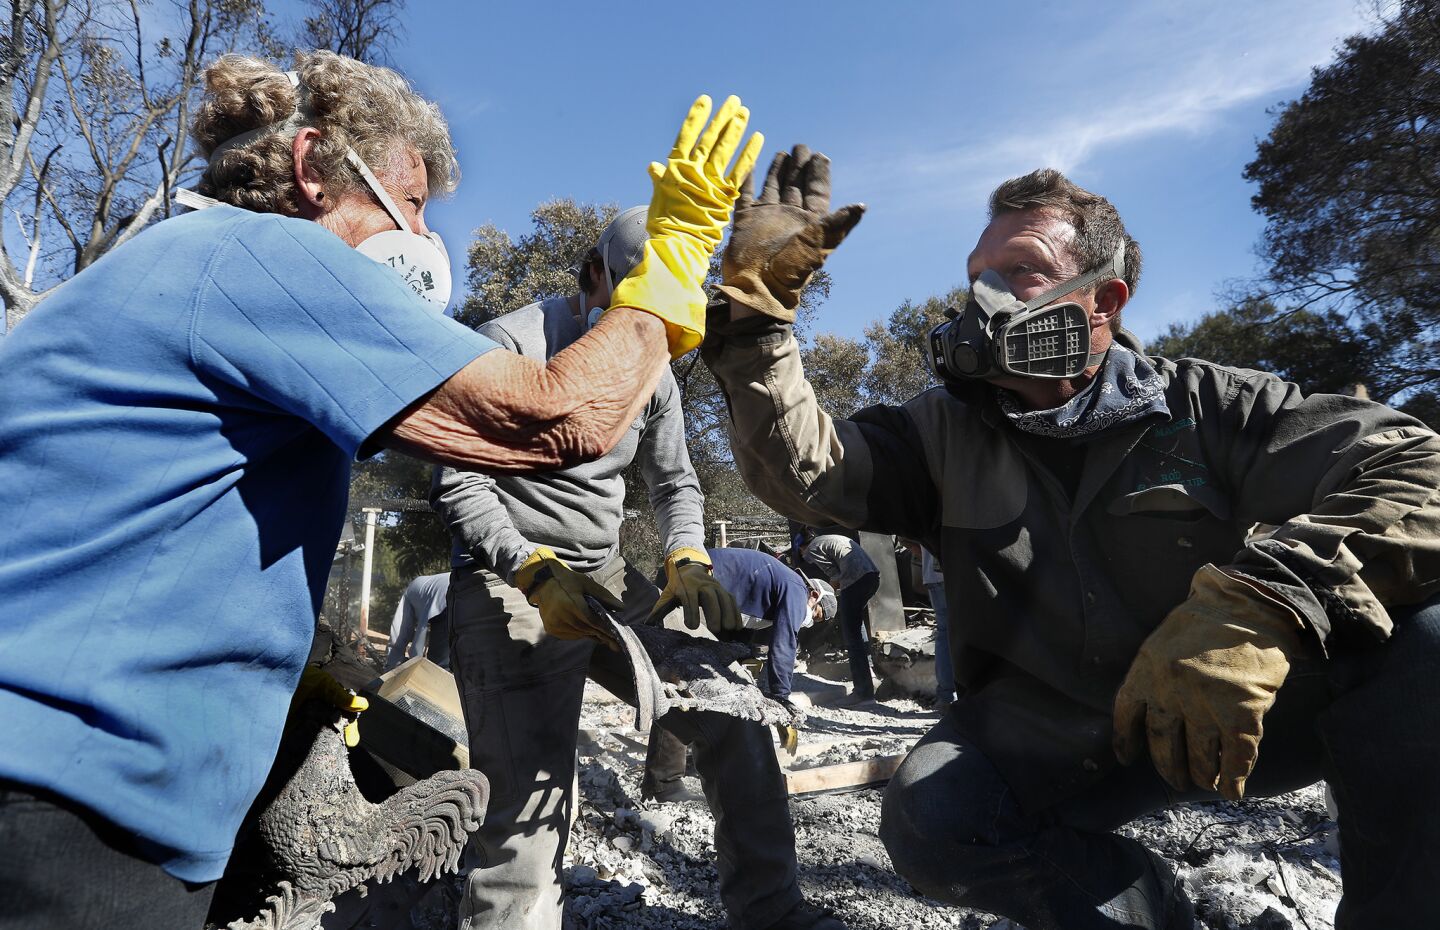 Leona Mote, left, high-fives Trevor Quirk as a team of volunteers helps sift through the rubble of her home near Ojai that burnt to the ground in the Thomas fire. Among the items recovered were her husband's wedding band, jewelry and part of a coin collection.